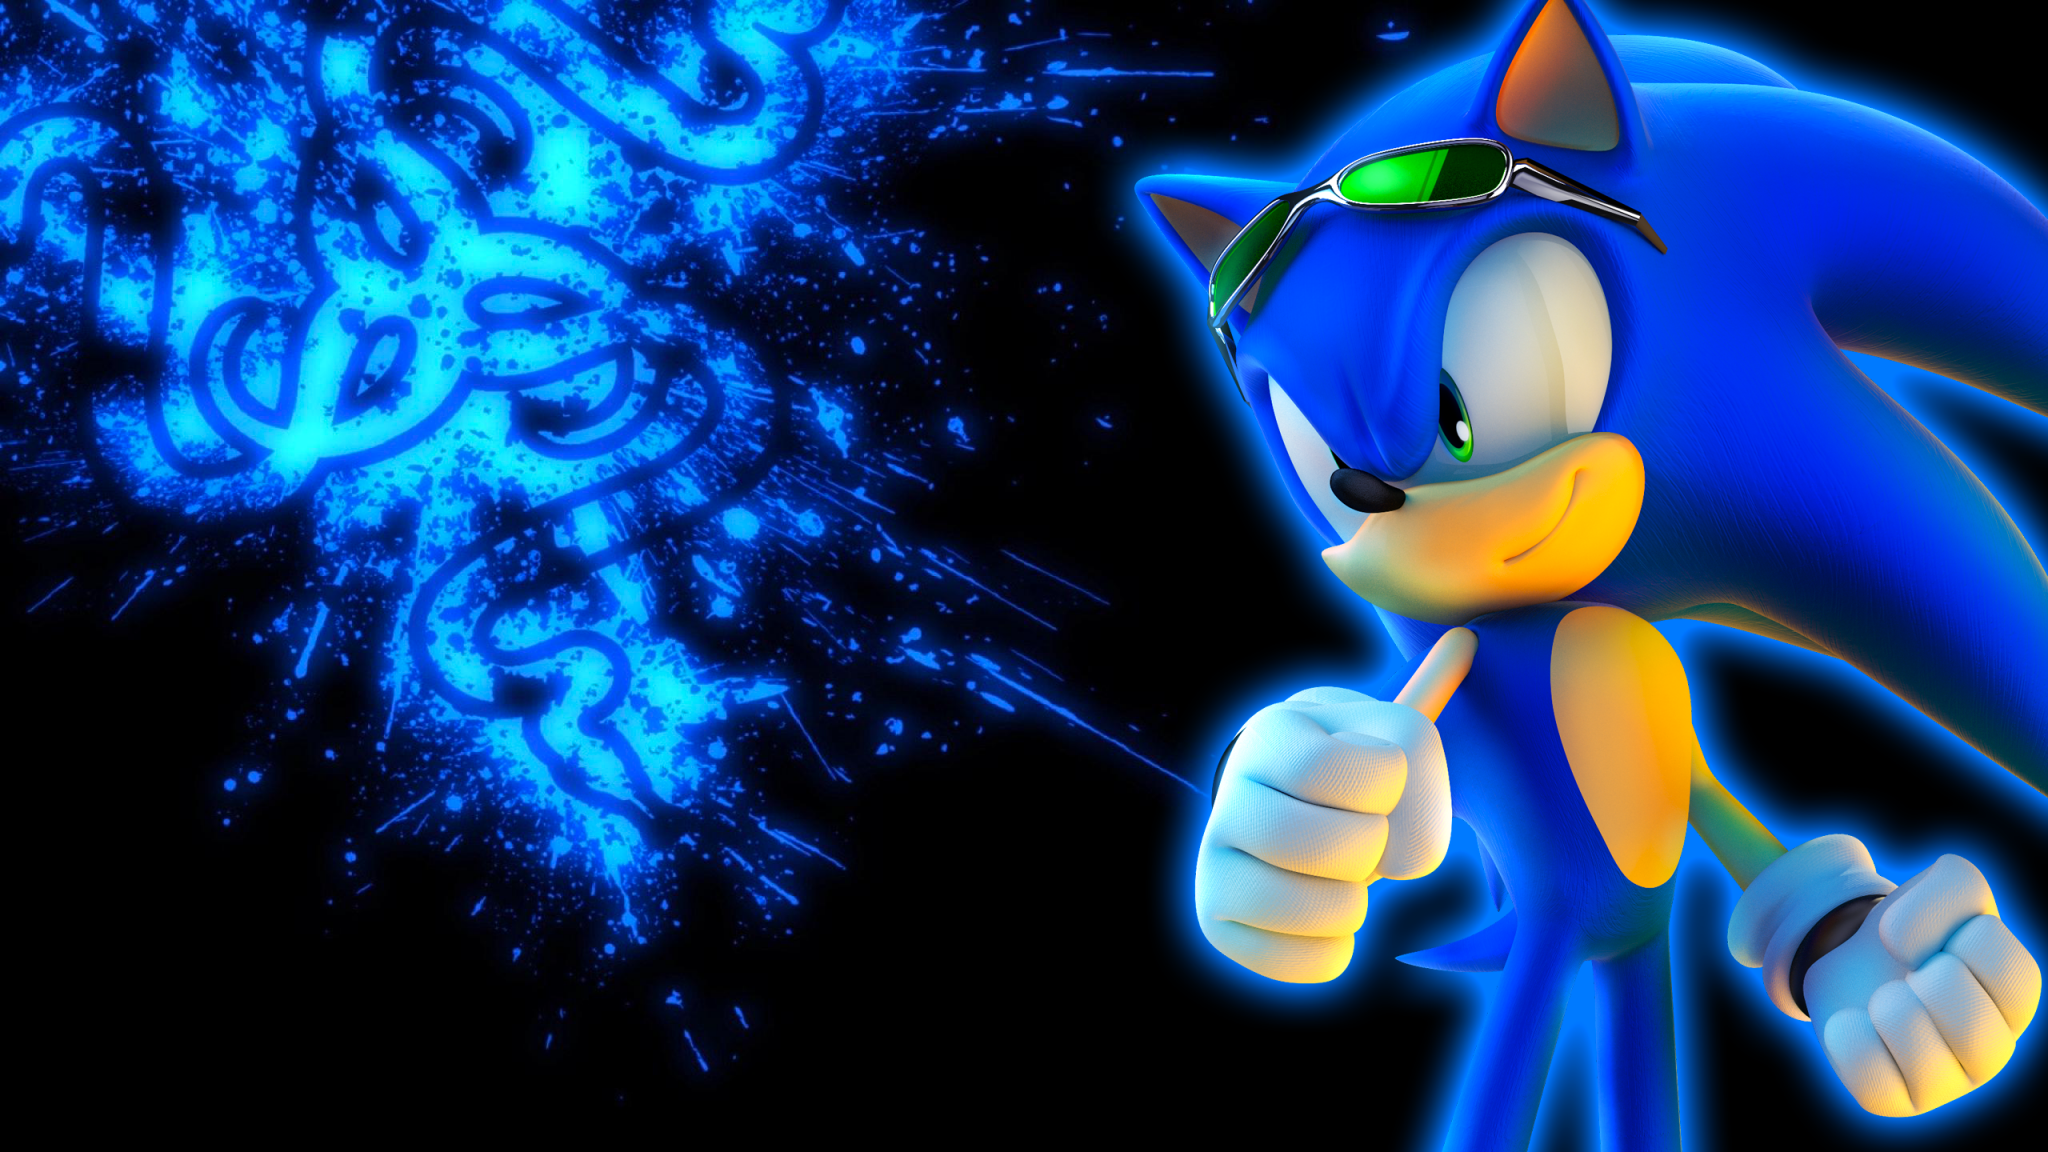 Sonic hd backgrounds p k k hd wallpapers backgrounds free download rare gallery